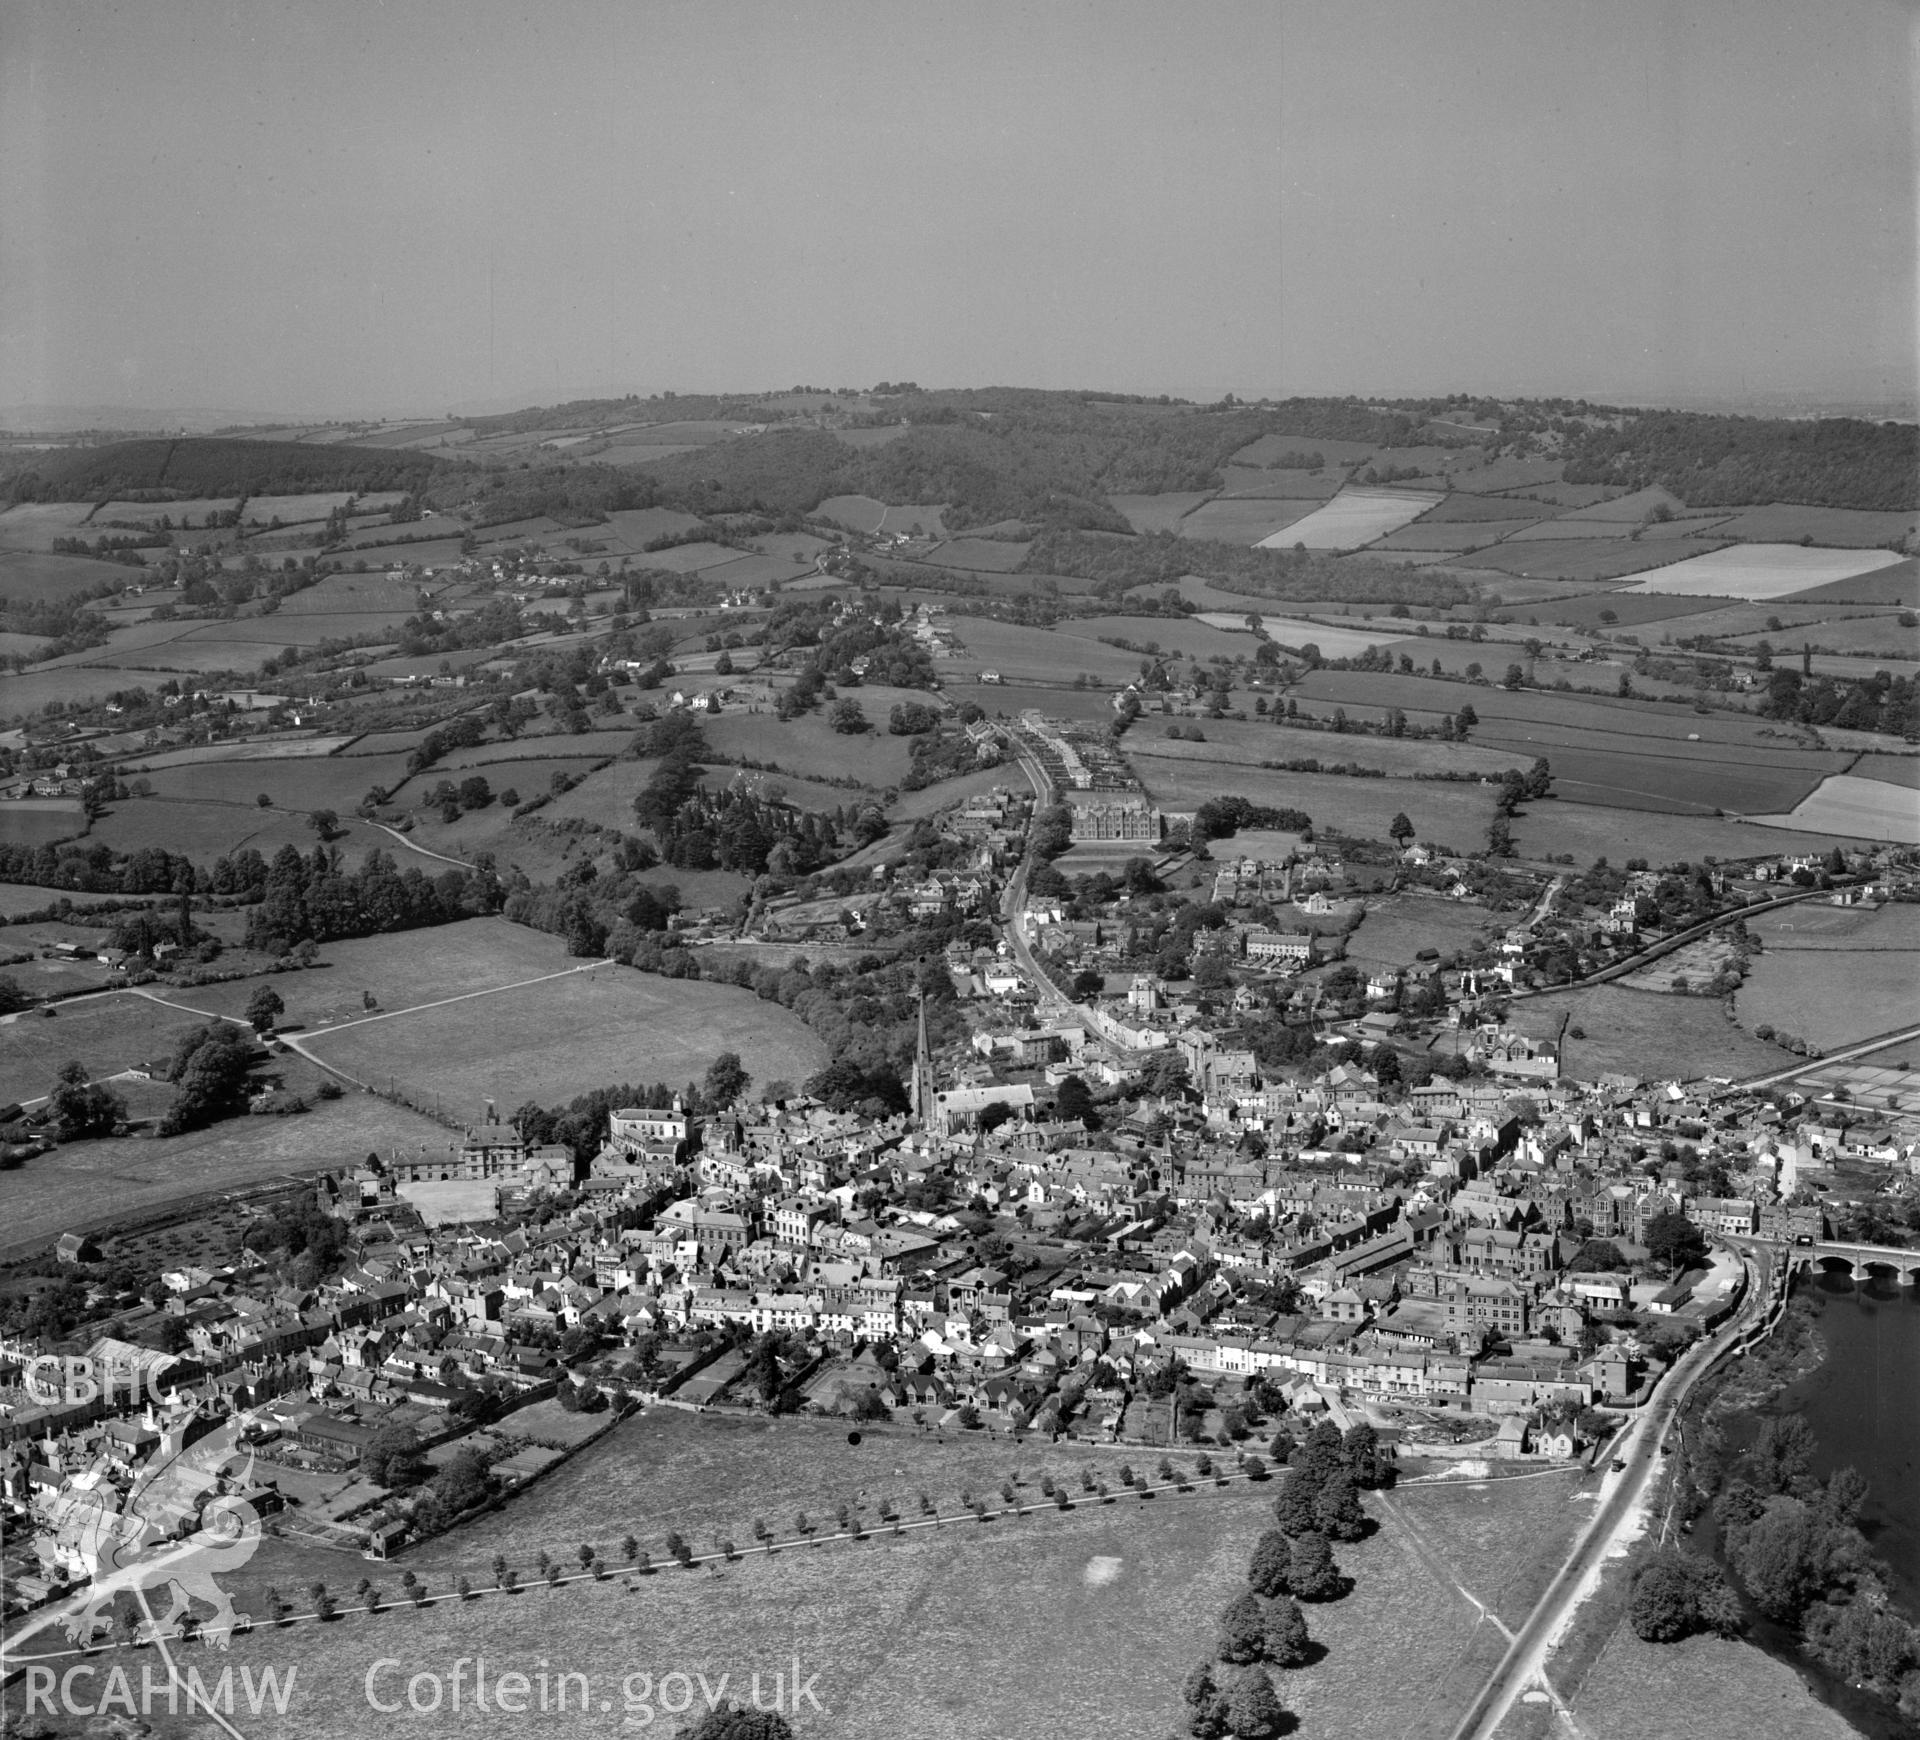 General view of Monmouth